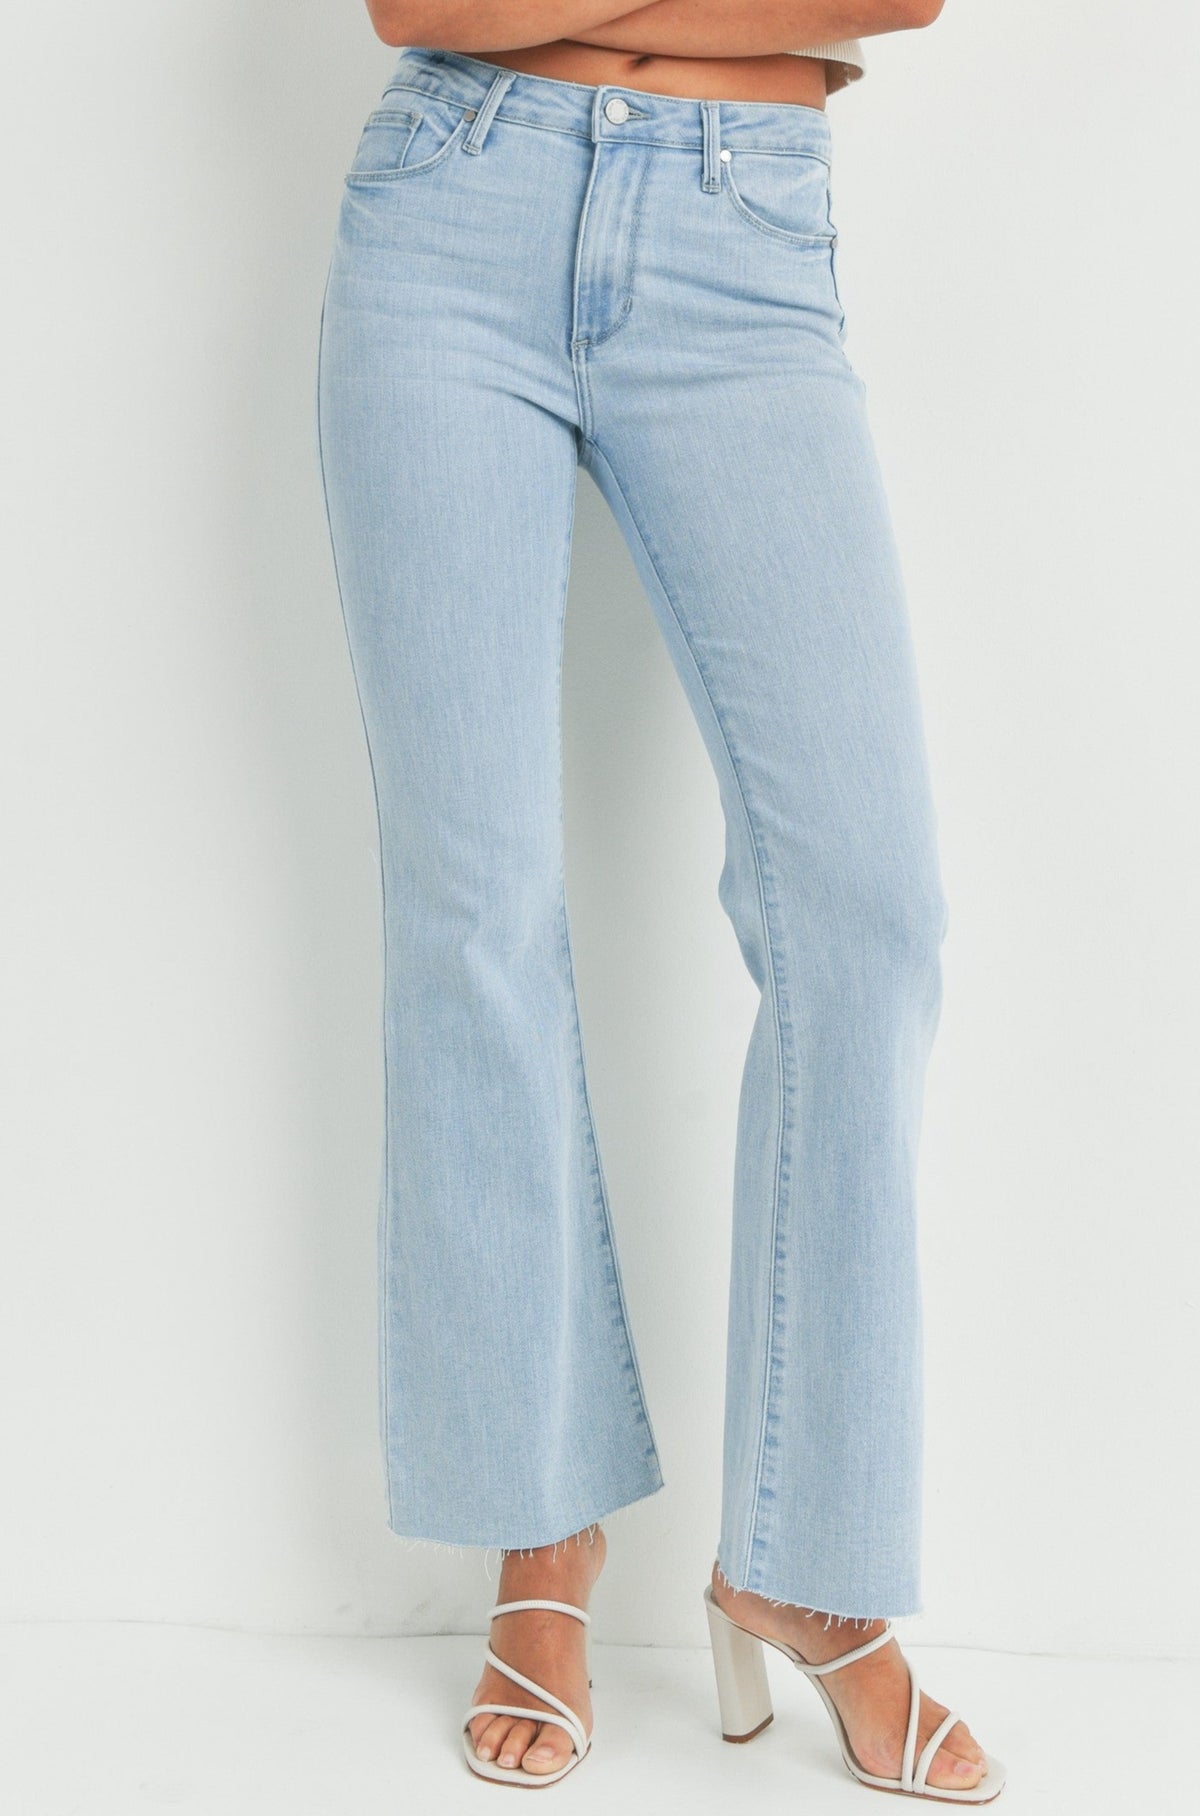 The Fall Flare Jean